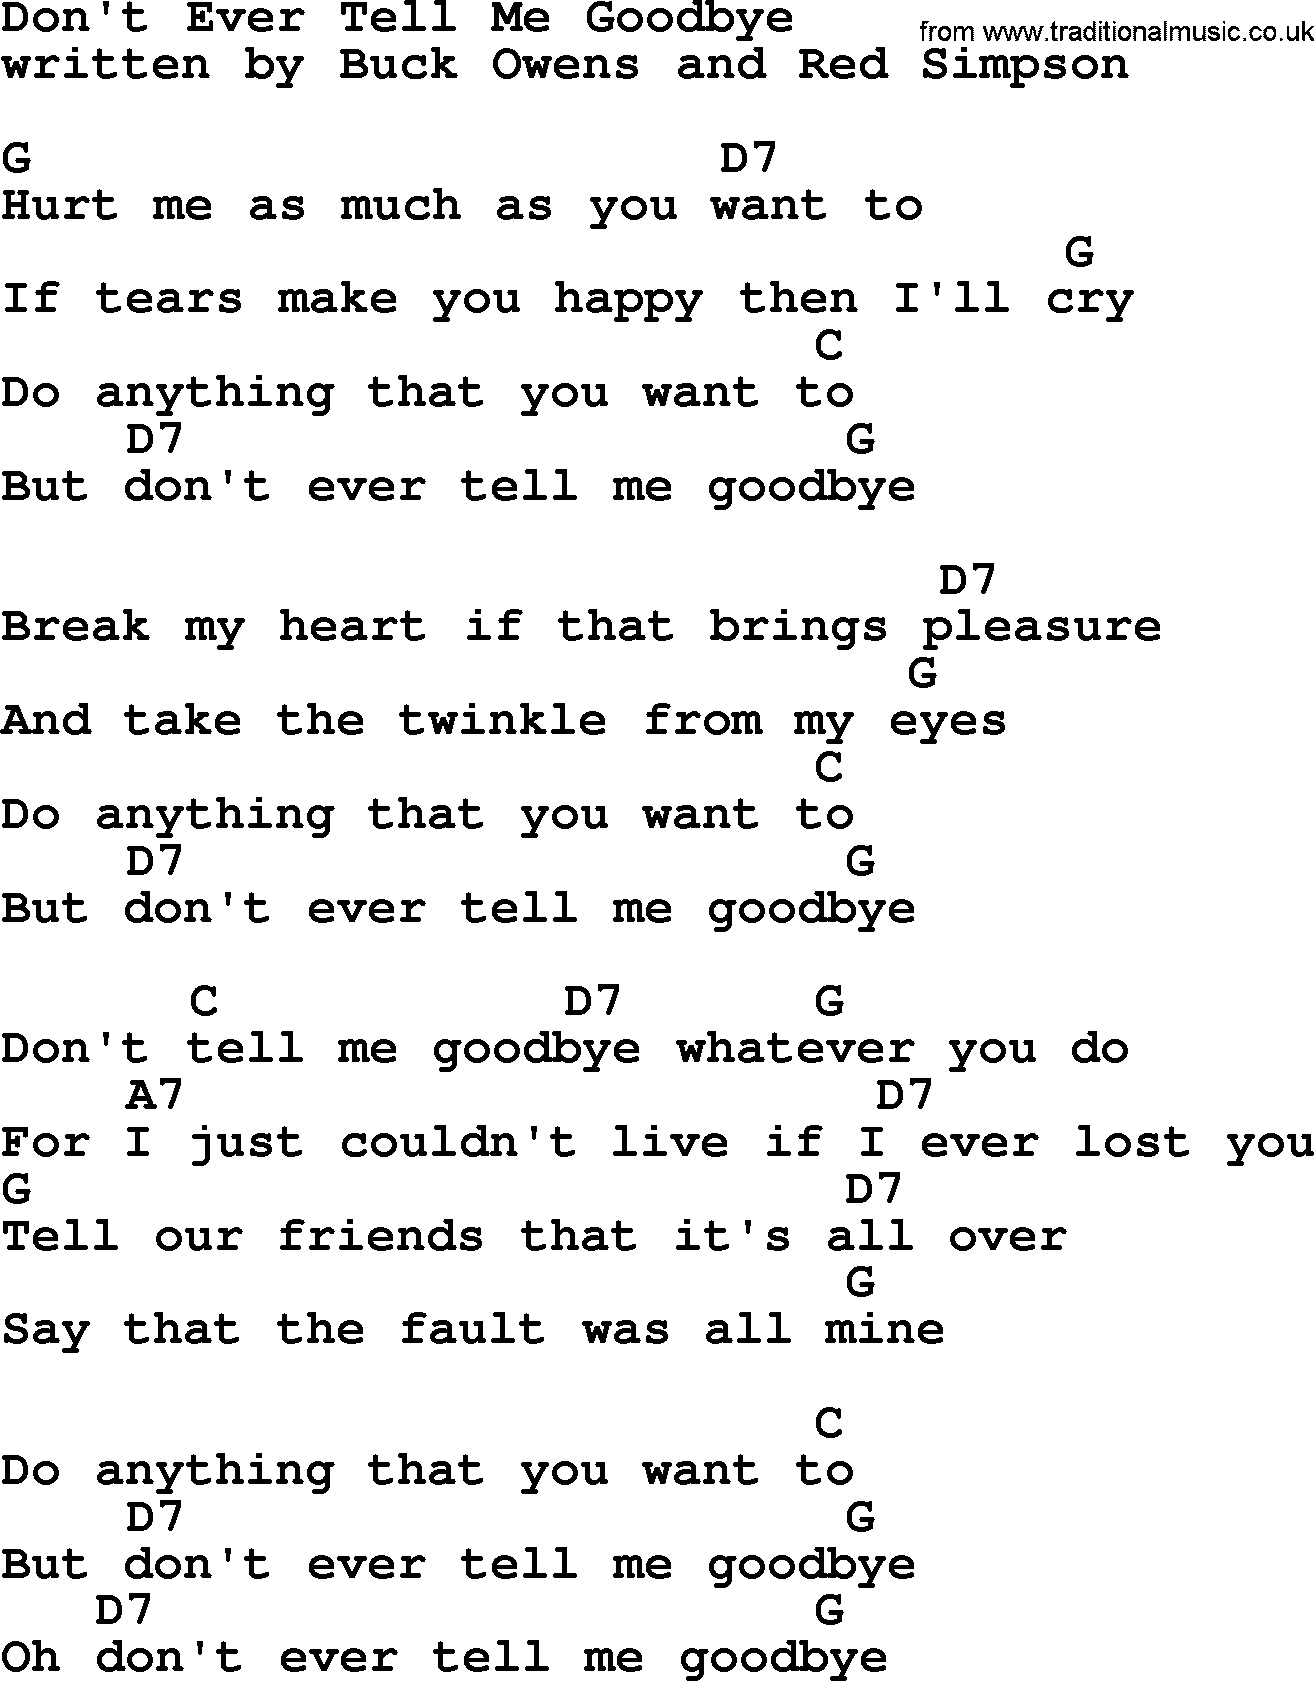 Bluegrass song: Don't Ever Tell Me Goodbye, lyrics and chords